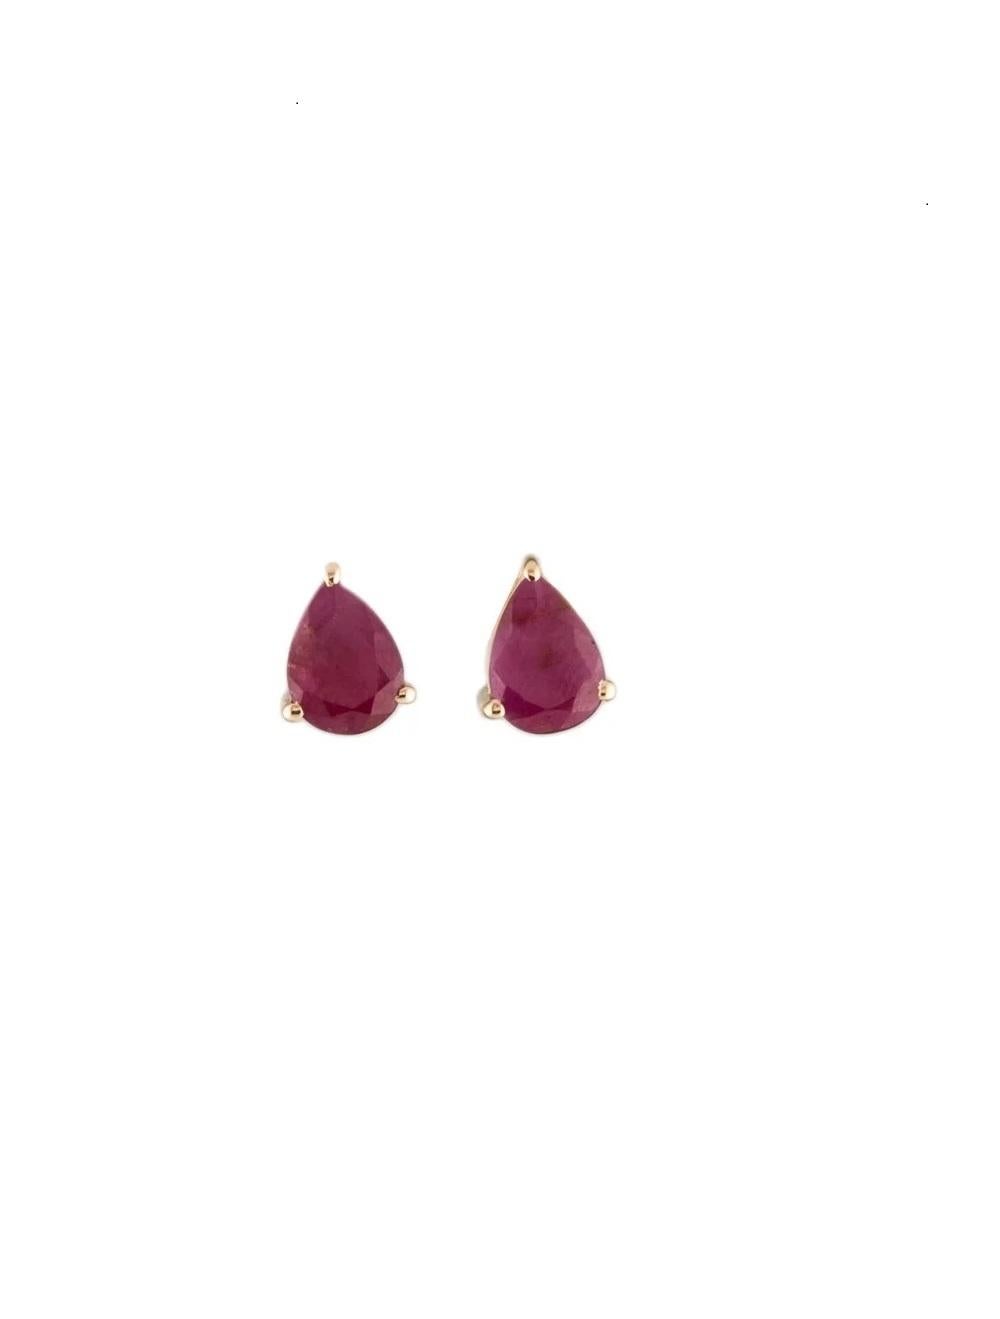 14K Ruby Stud Earrings 1.42ctw Pear Gold Red Gemstone - Luxury Jewelry In New Condition For Sale In Holtsville, NY